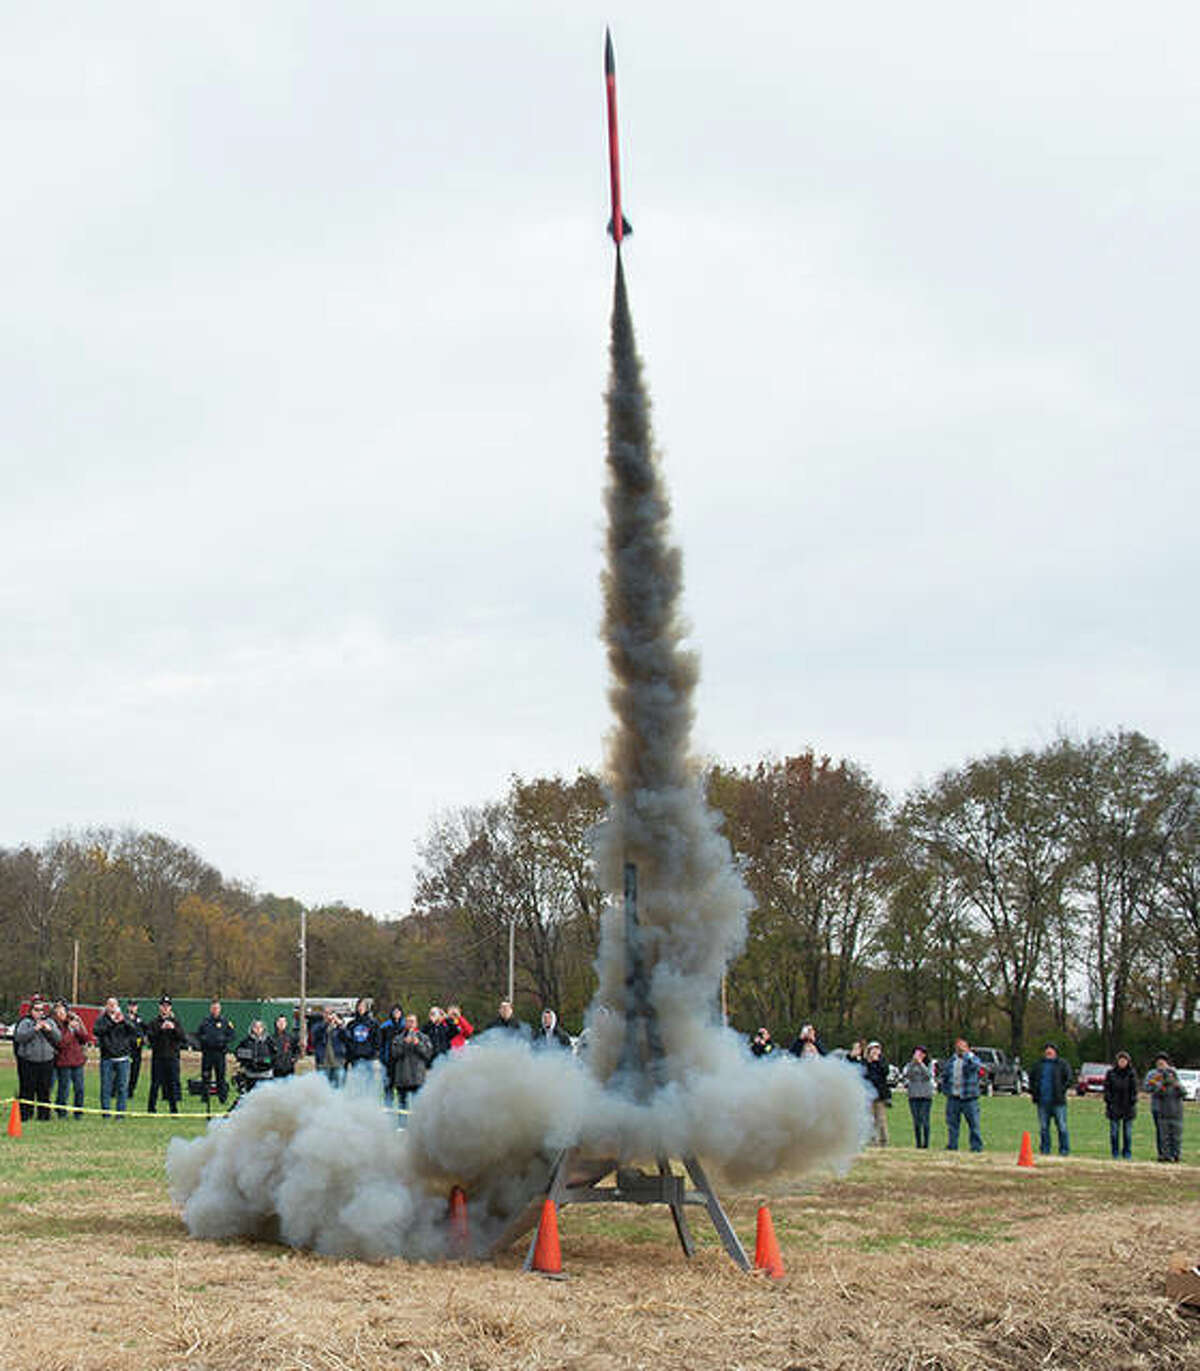 The Cougar Rockets successfully launch a high-powered rocket on SIUE’s campus.